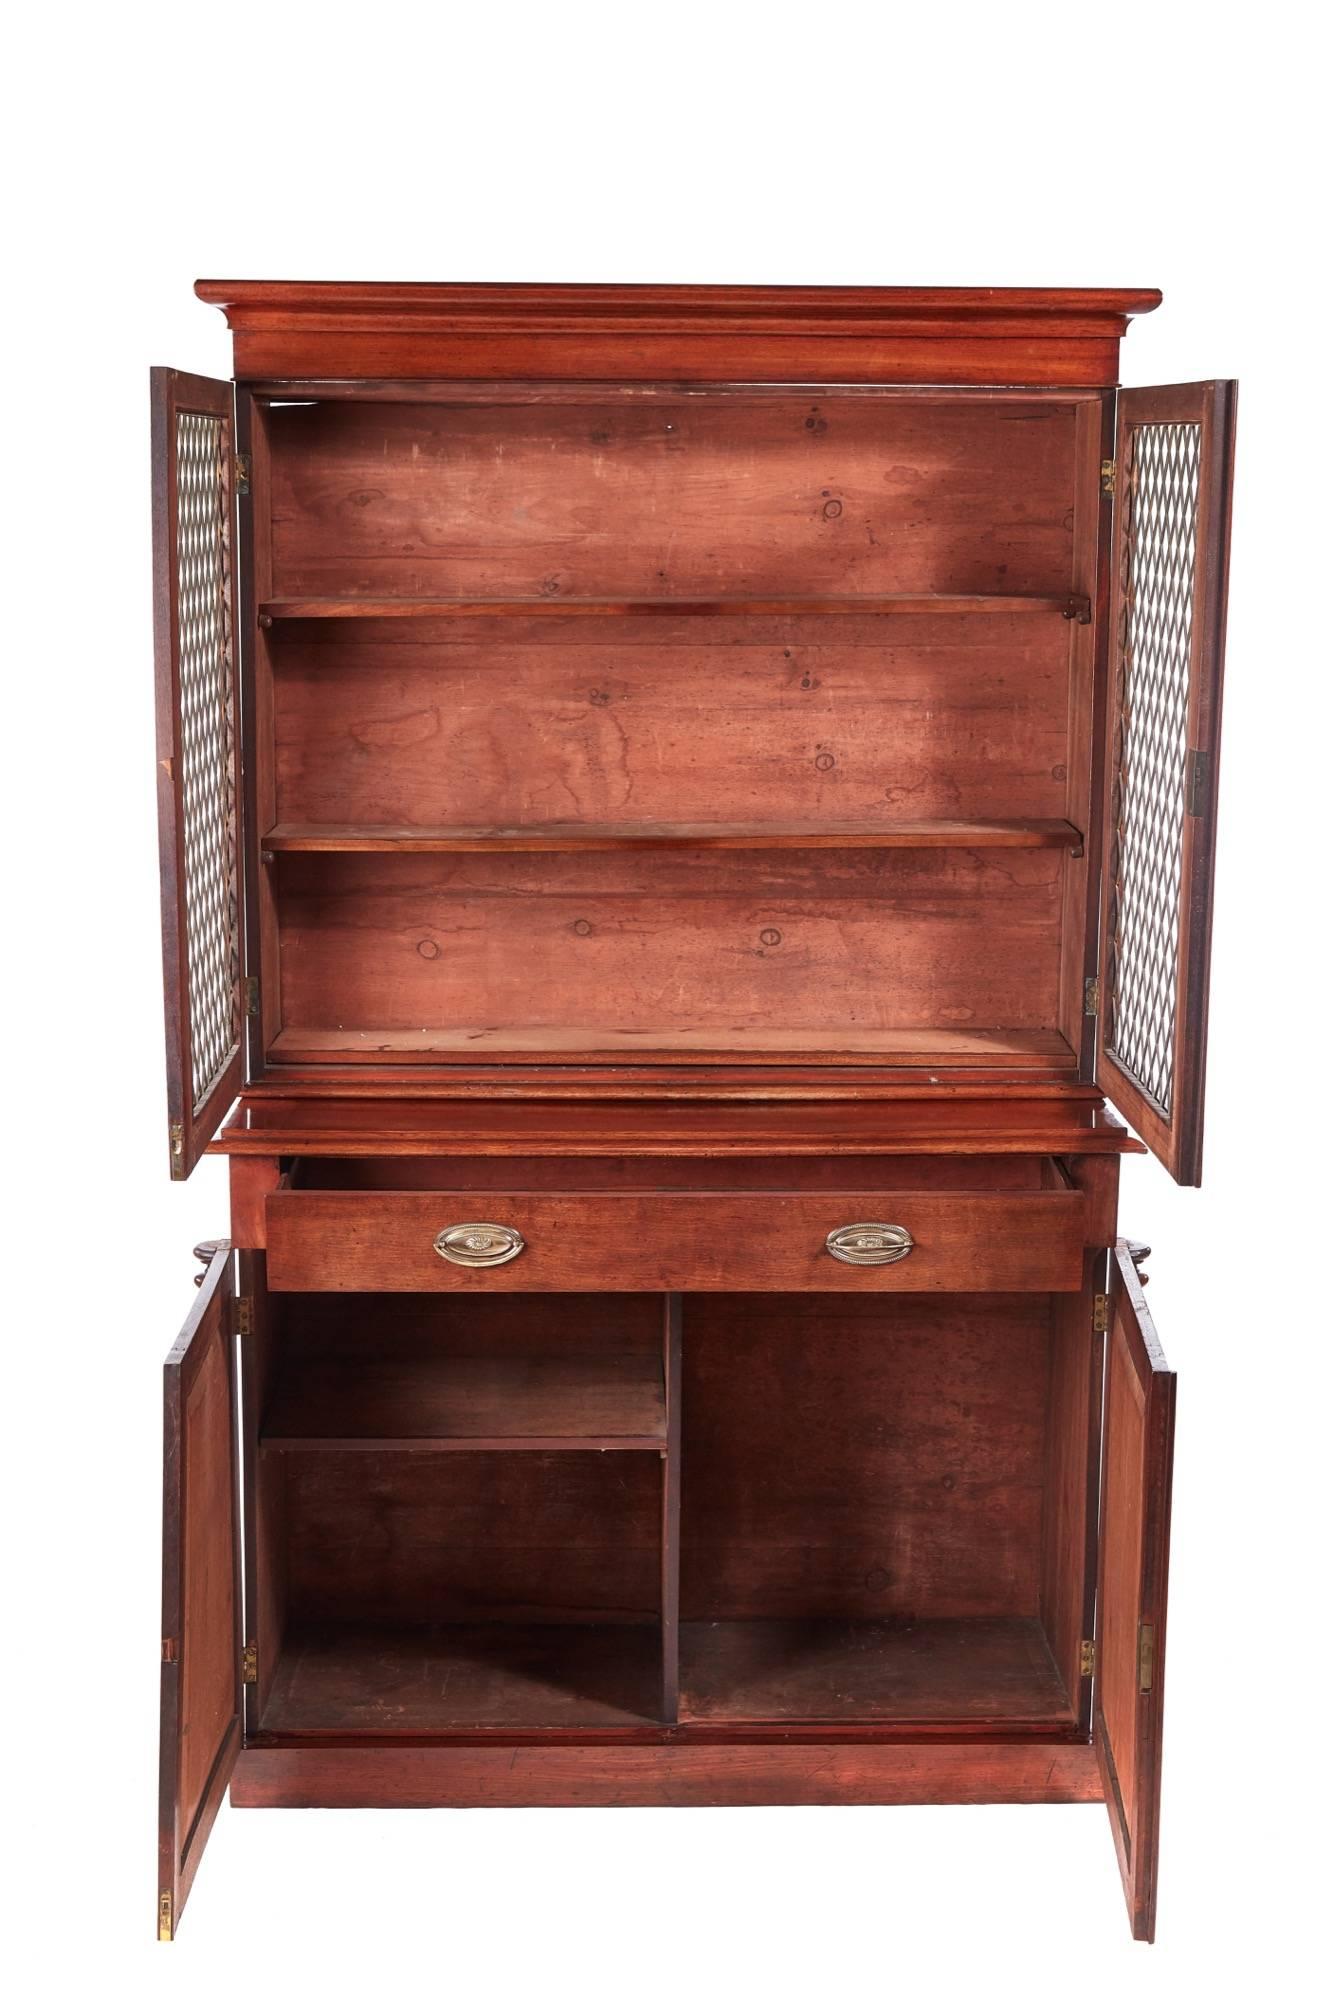 Quality antique William IV bookcase, the upper section having a shaped cornice over a pair of mahogany doors with brass grilles opening to reveal an interior with three adjustable shelves, the base having one long drawer with brass handles, two